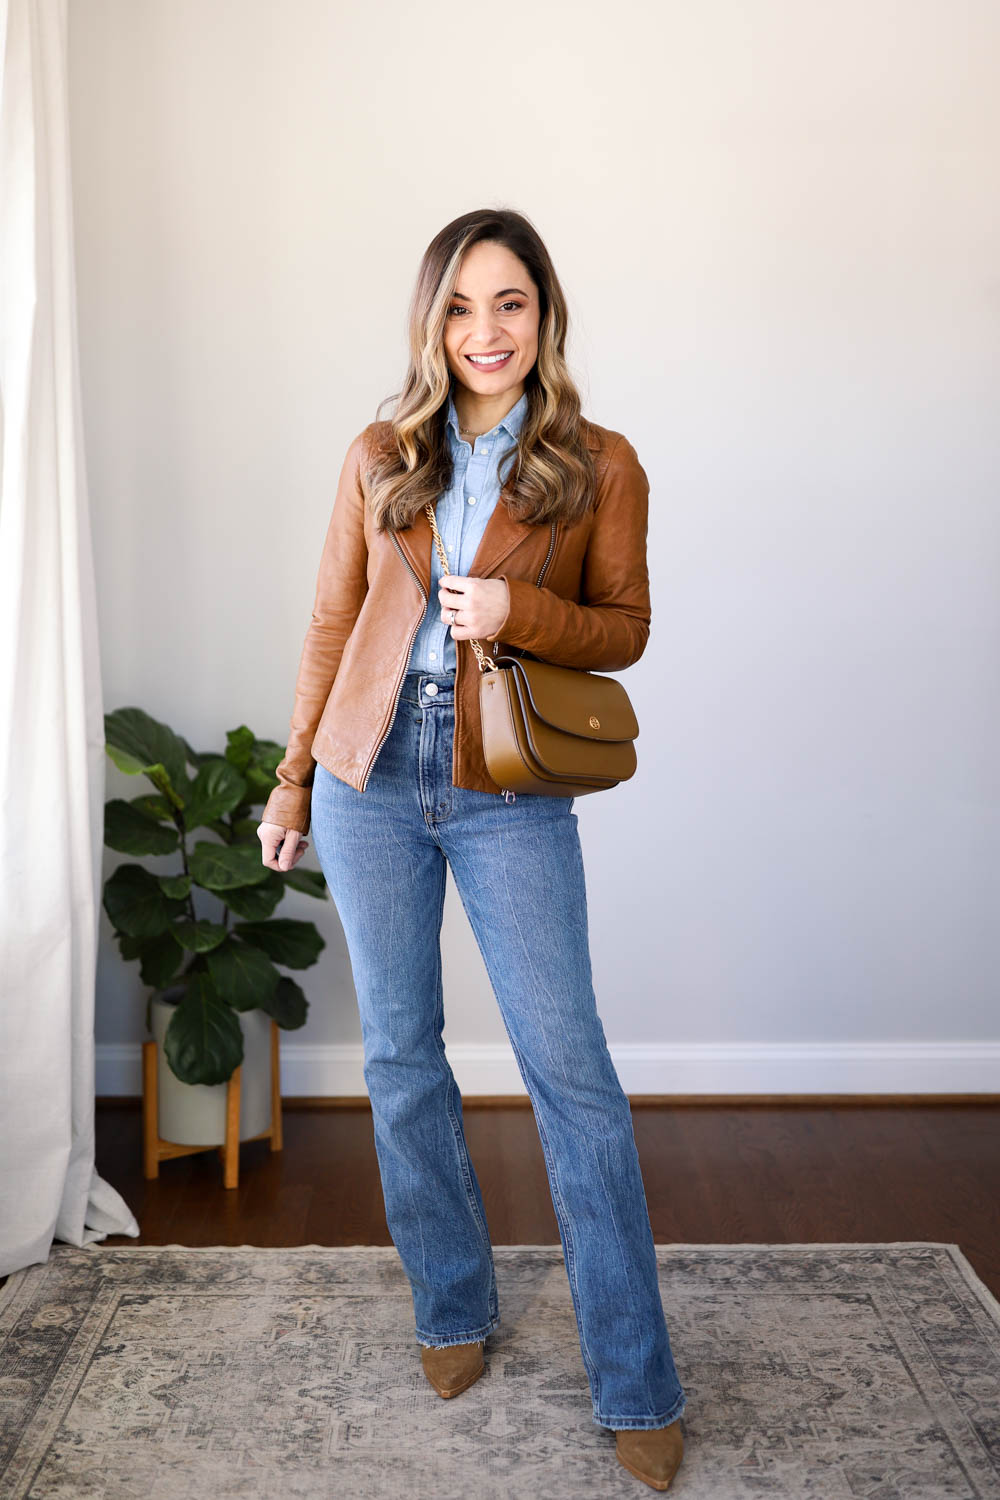 How to Style Flare Jeans With Shoes: Outfit Ideas That Work